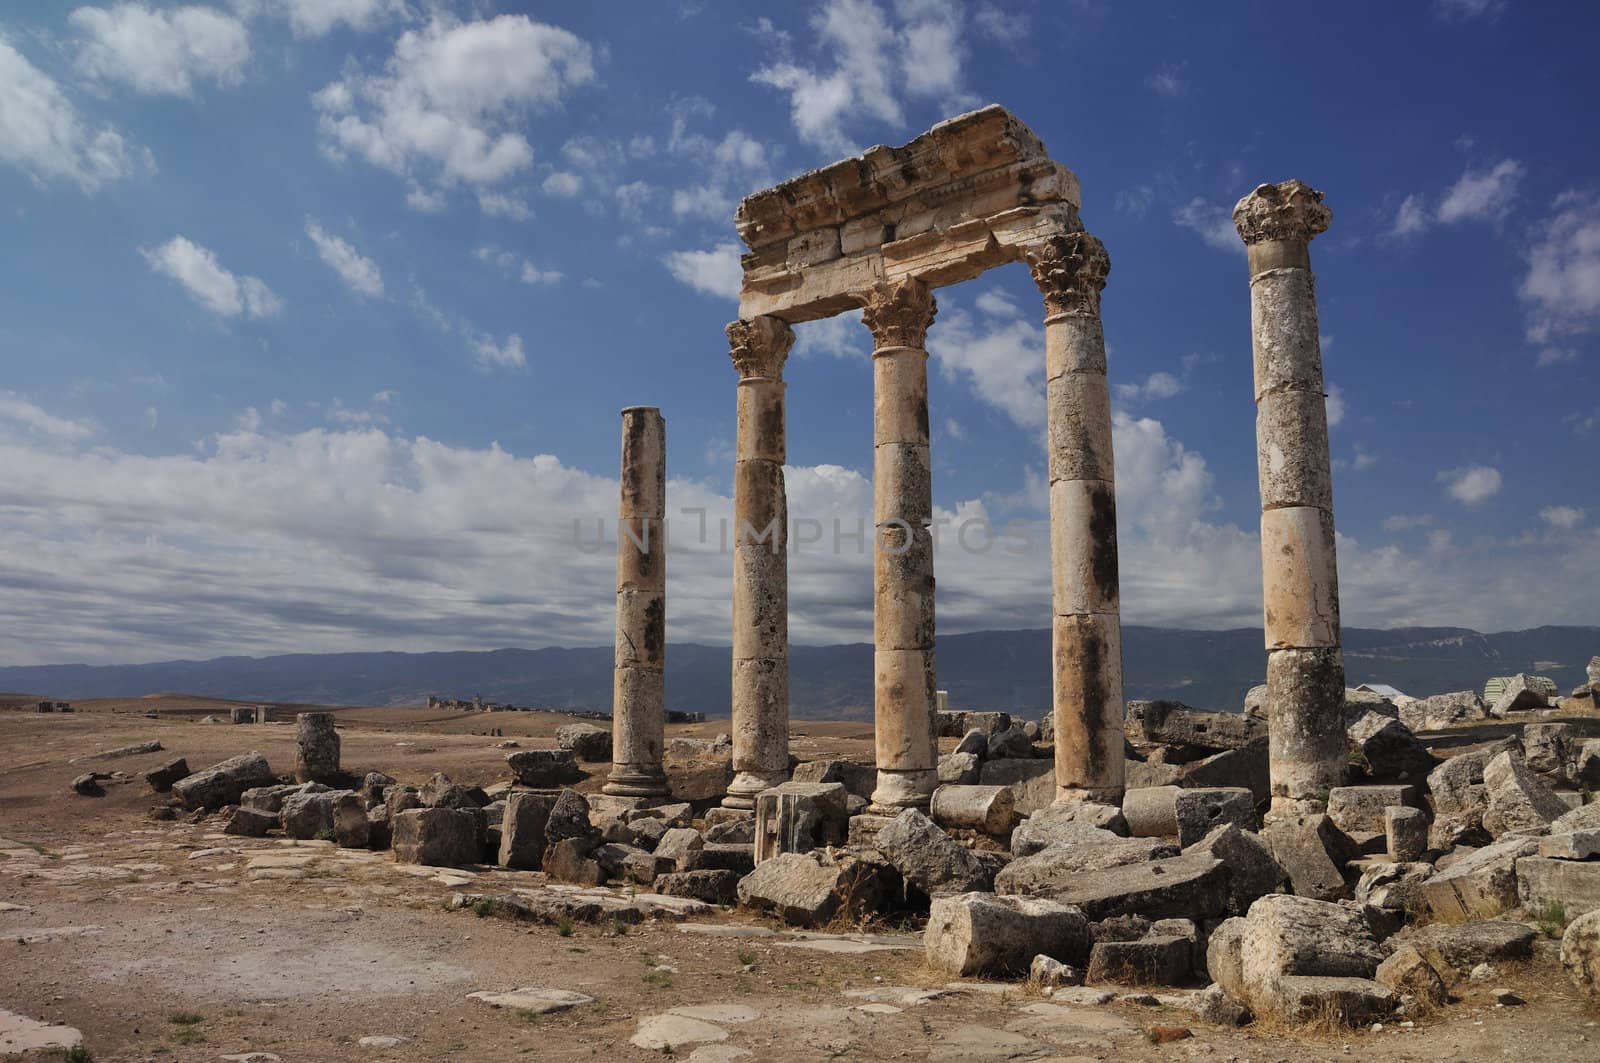 Apamea or Apameia was a treasure city and stud-depot of the Seleucid kings, was capital of Apamene, on the right bank of the Orontes River.